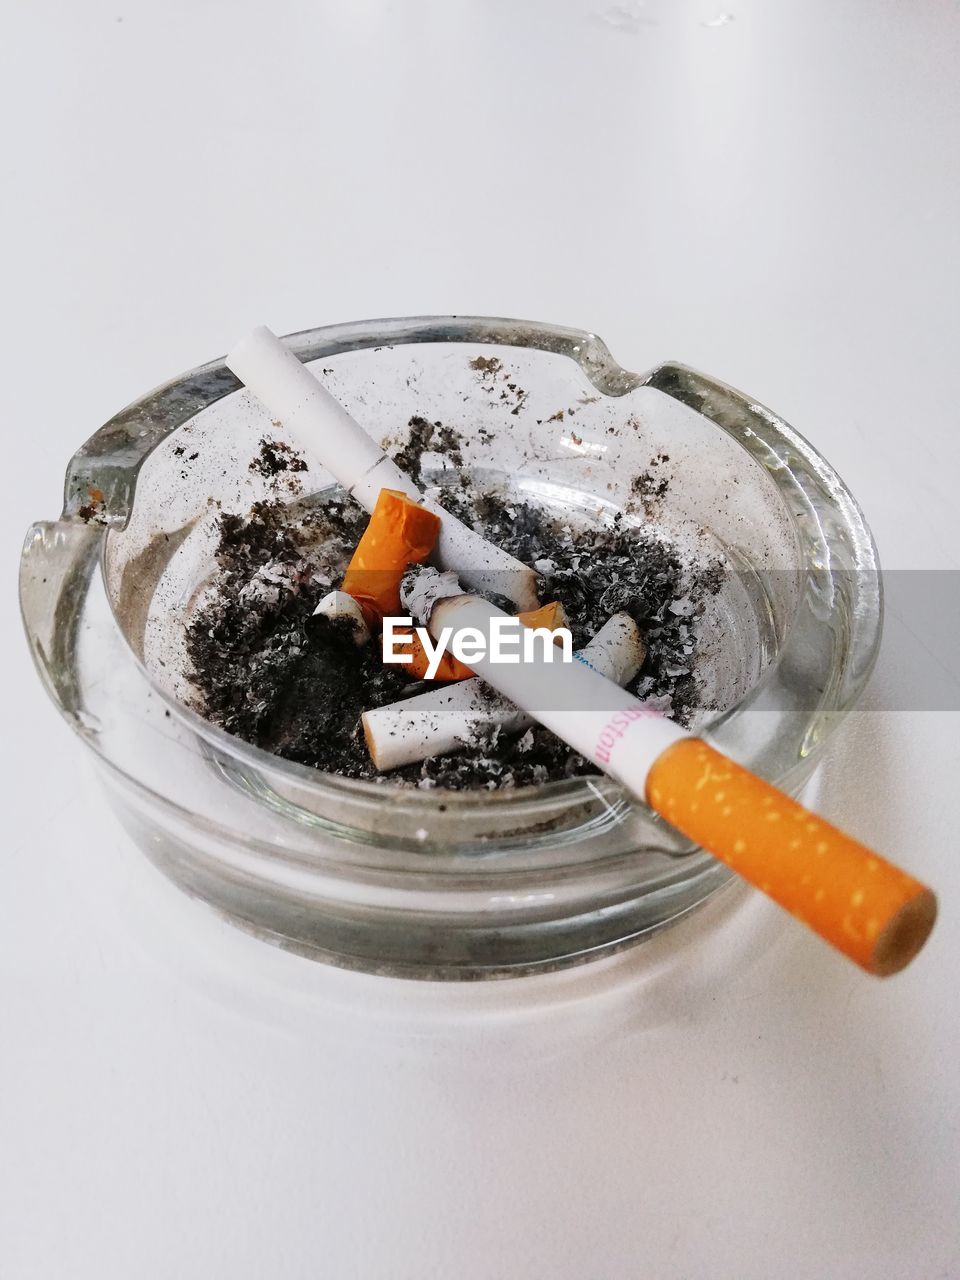 CLOSE-UP OF CIGARETTE SMOKING IN CONTAINER